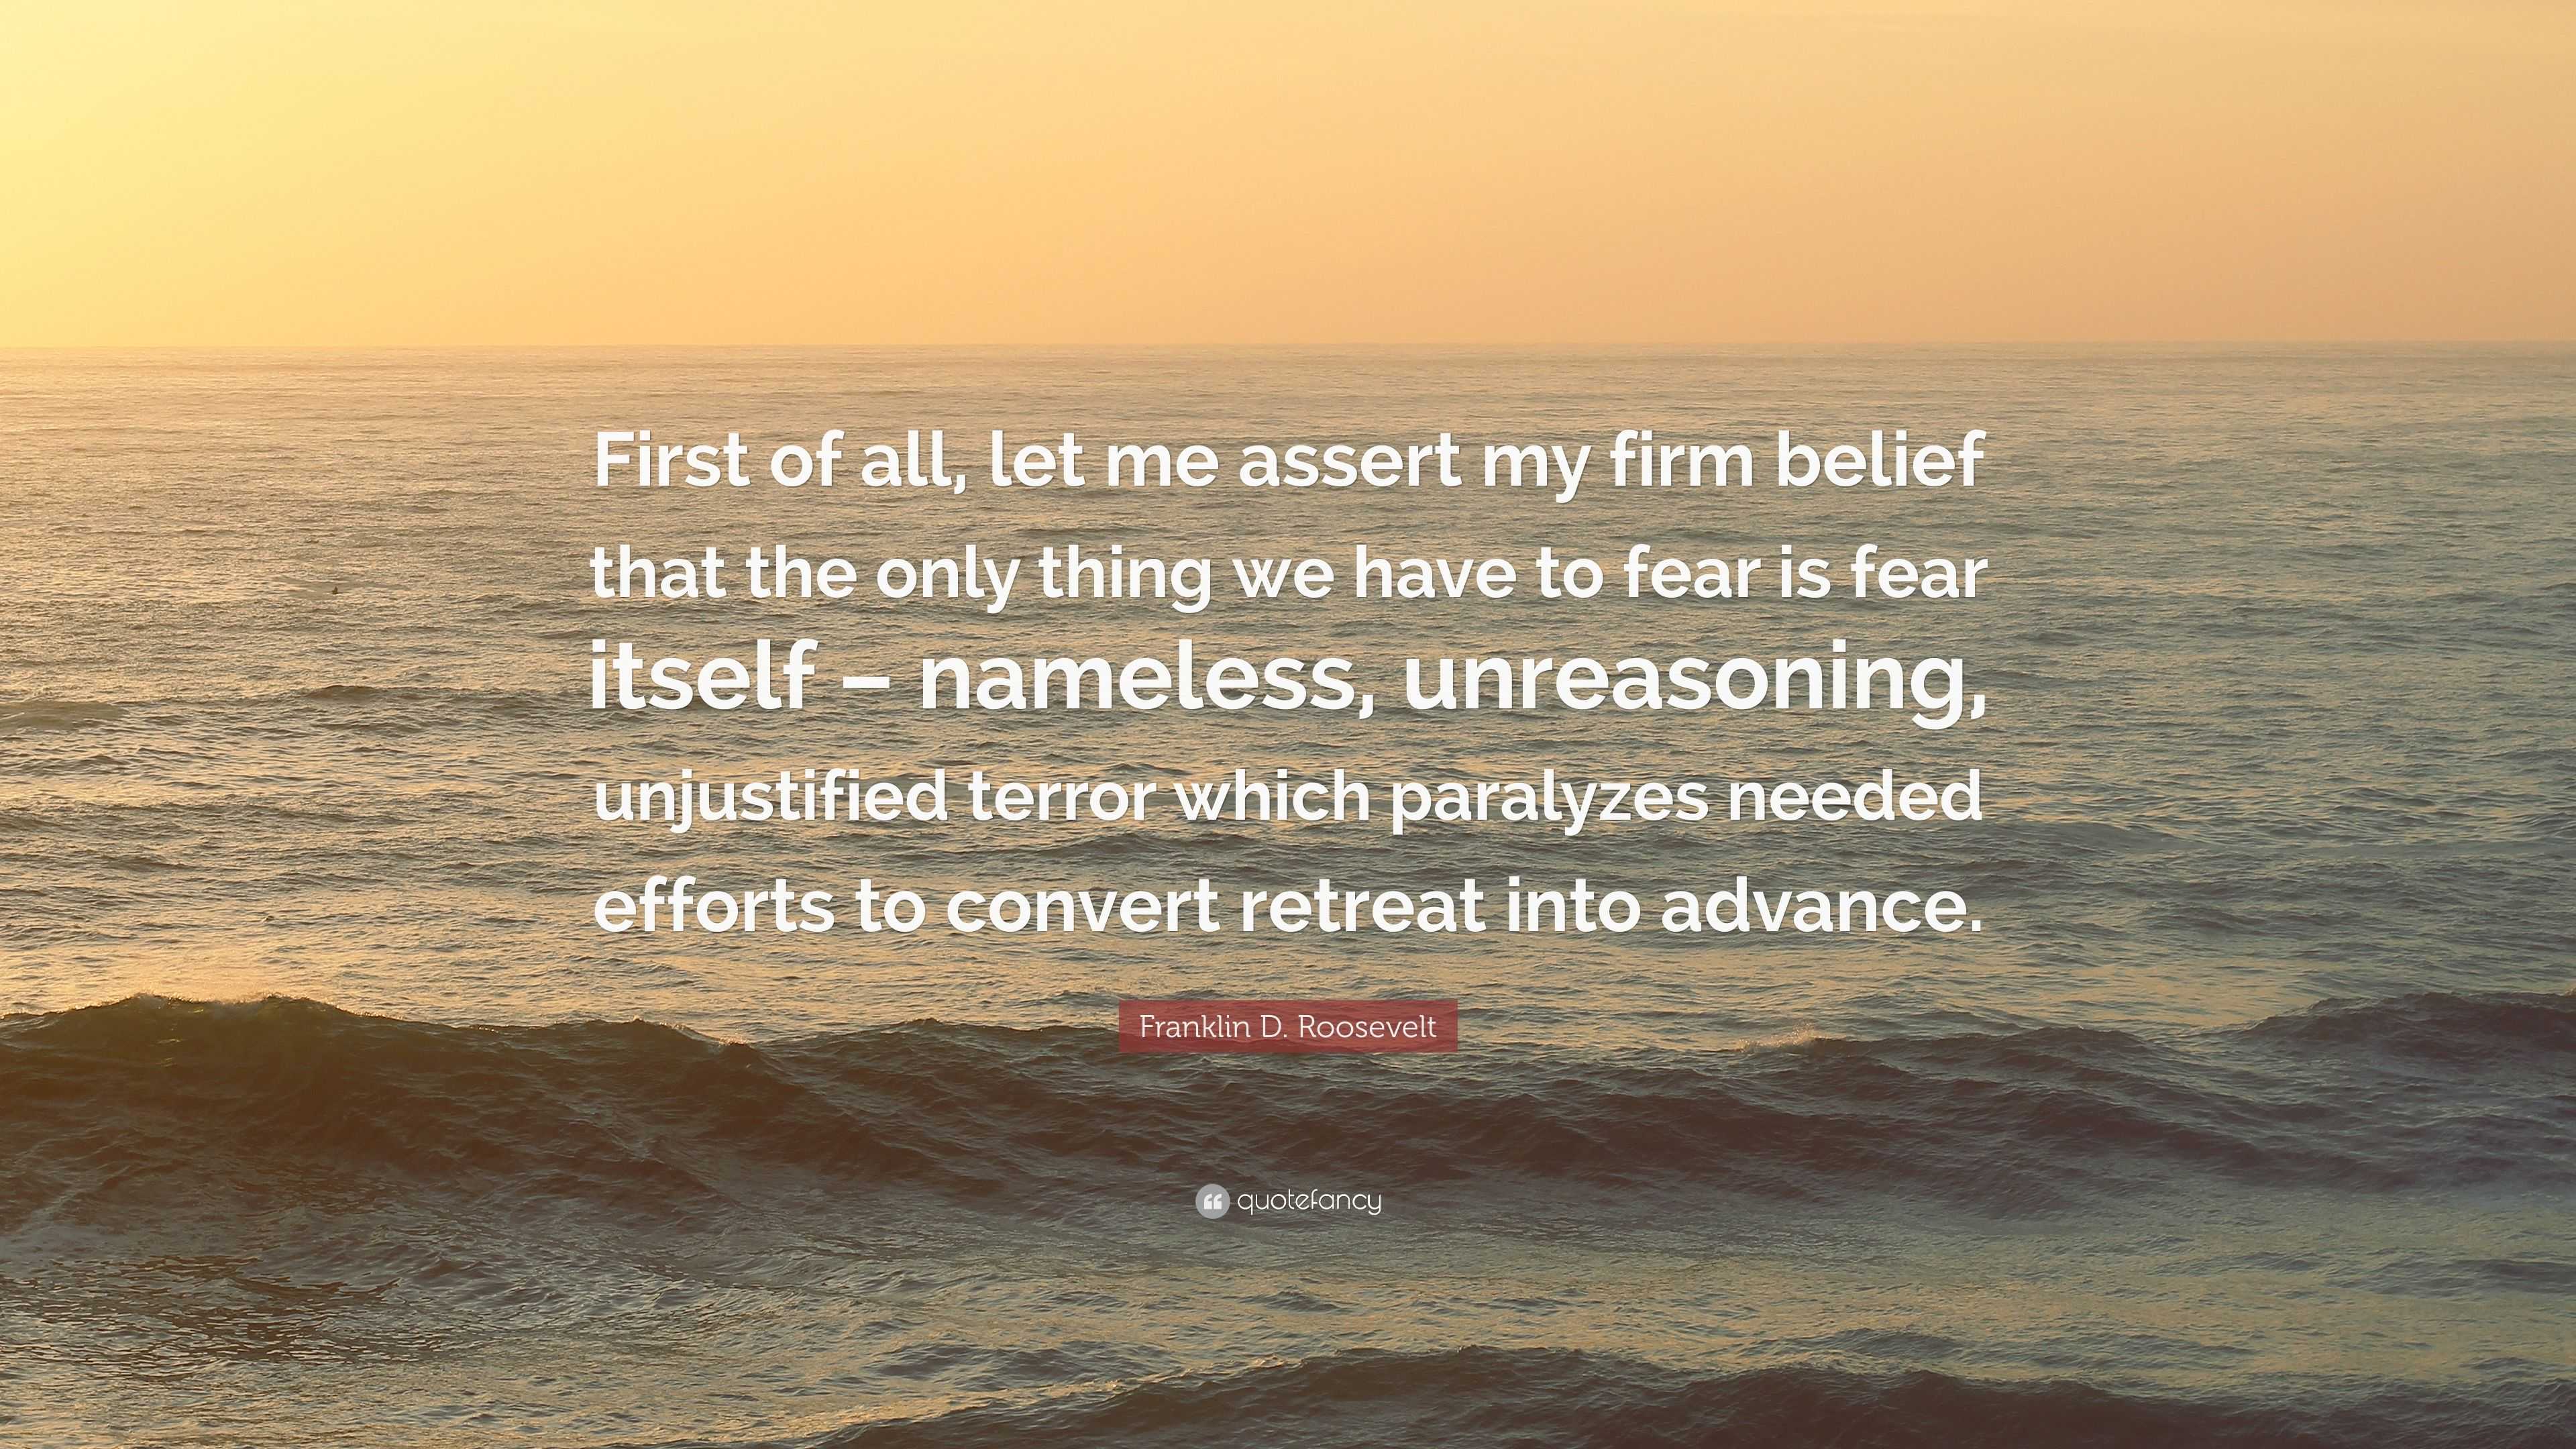 Franklin D. Roosevelt Quote: “First of all, let me assert my firm